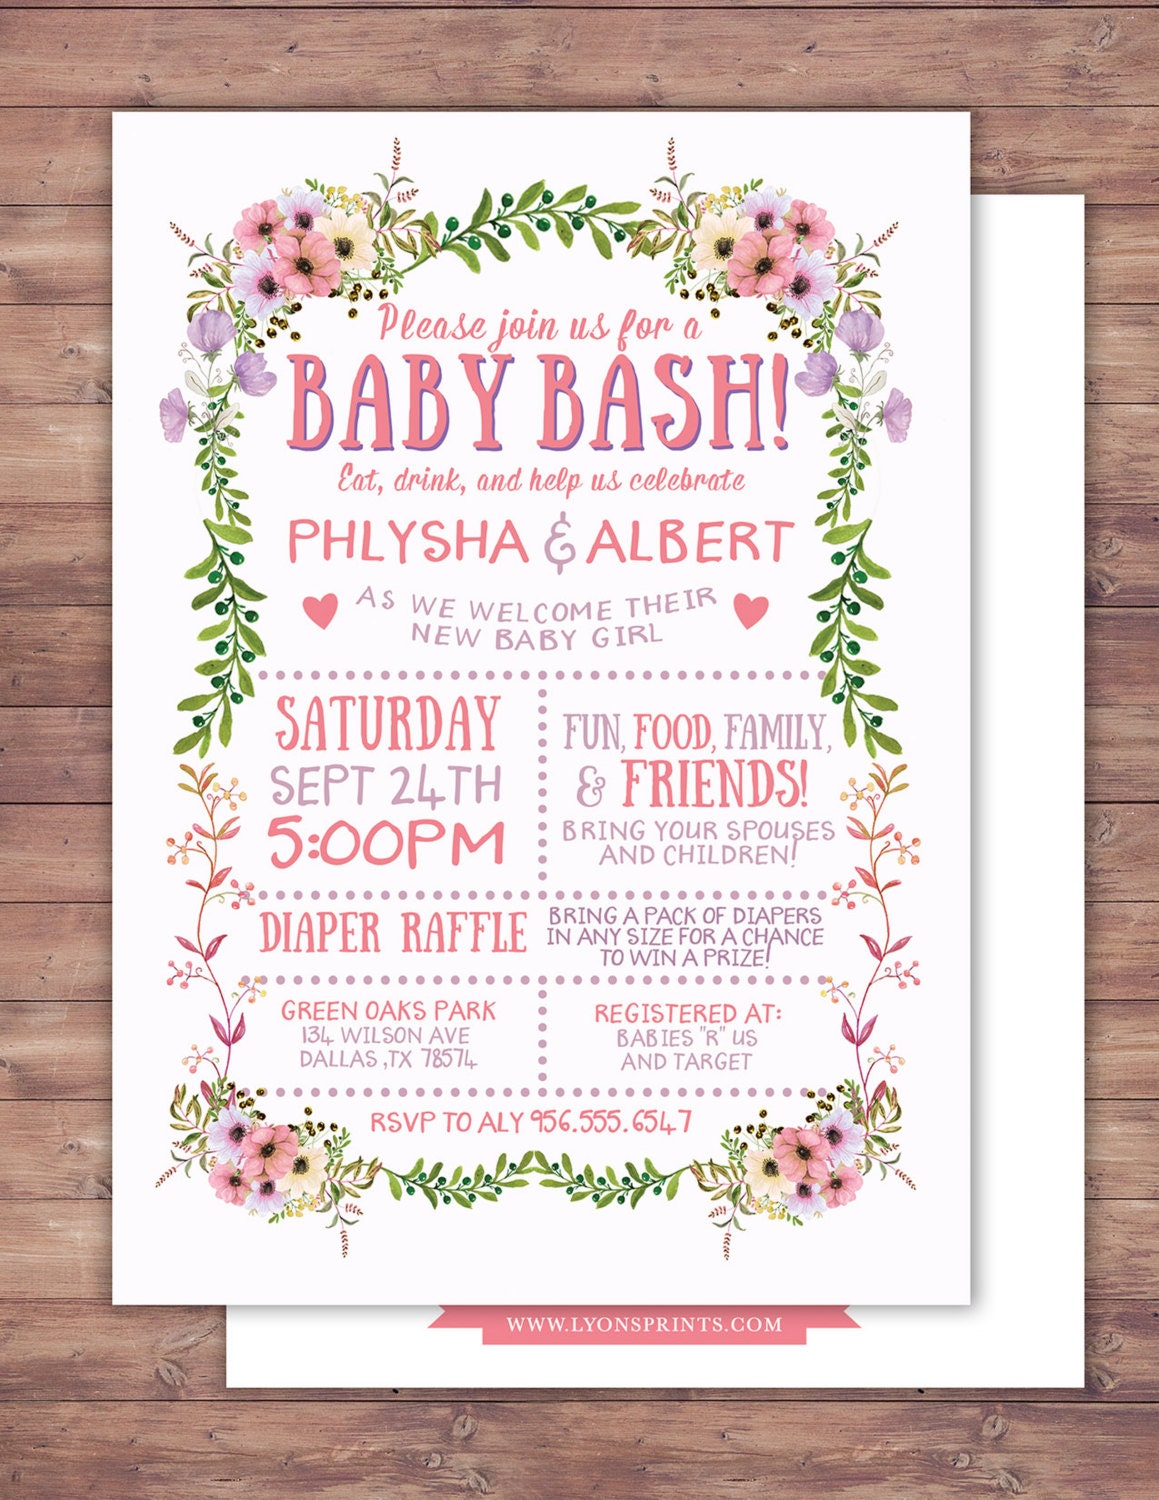 Floral, Rustic, Boho, Babyq Chalkboard Couples Co-Ed Baby Shower Bbq Invitation -Baby Is Brewing, Baby Girl Shower, Digital Files Only